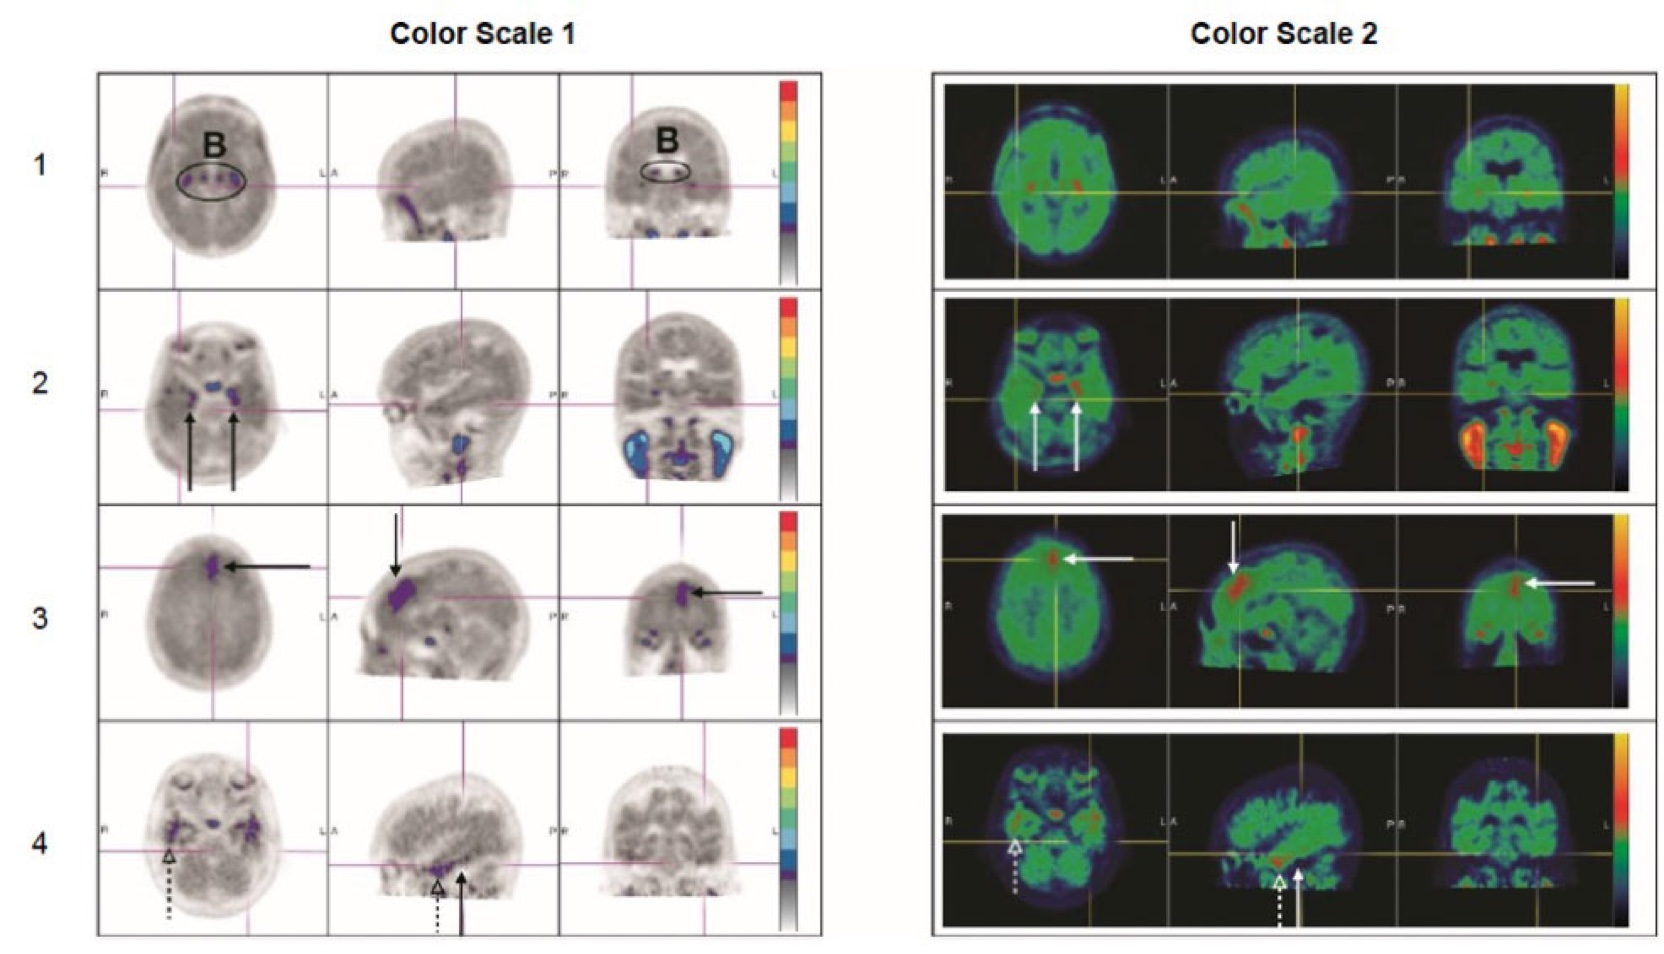 Two negative brain scans––a black and white scan and a colorful scan